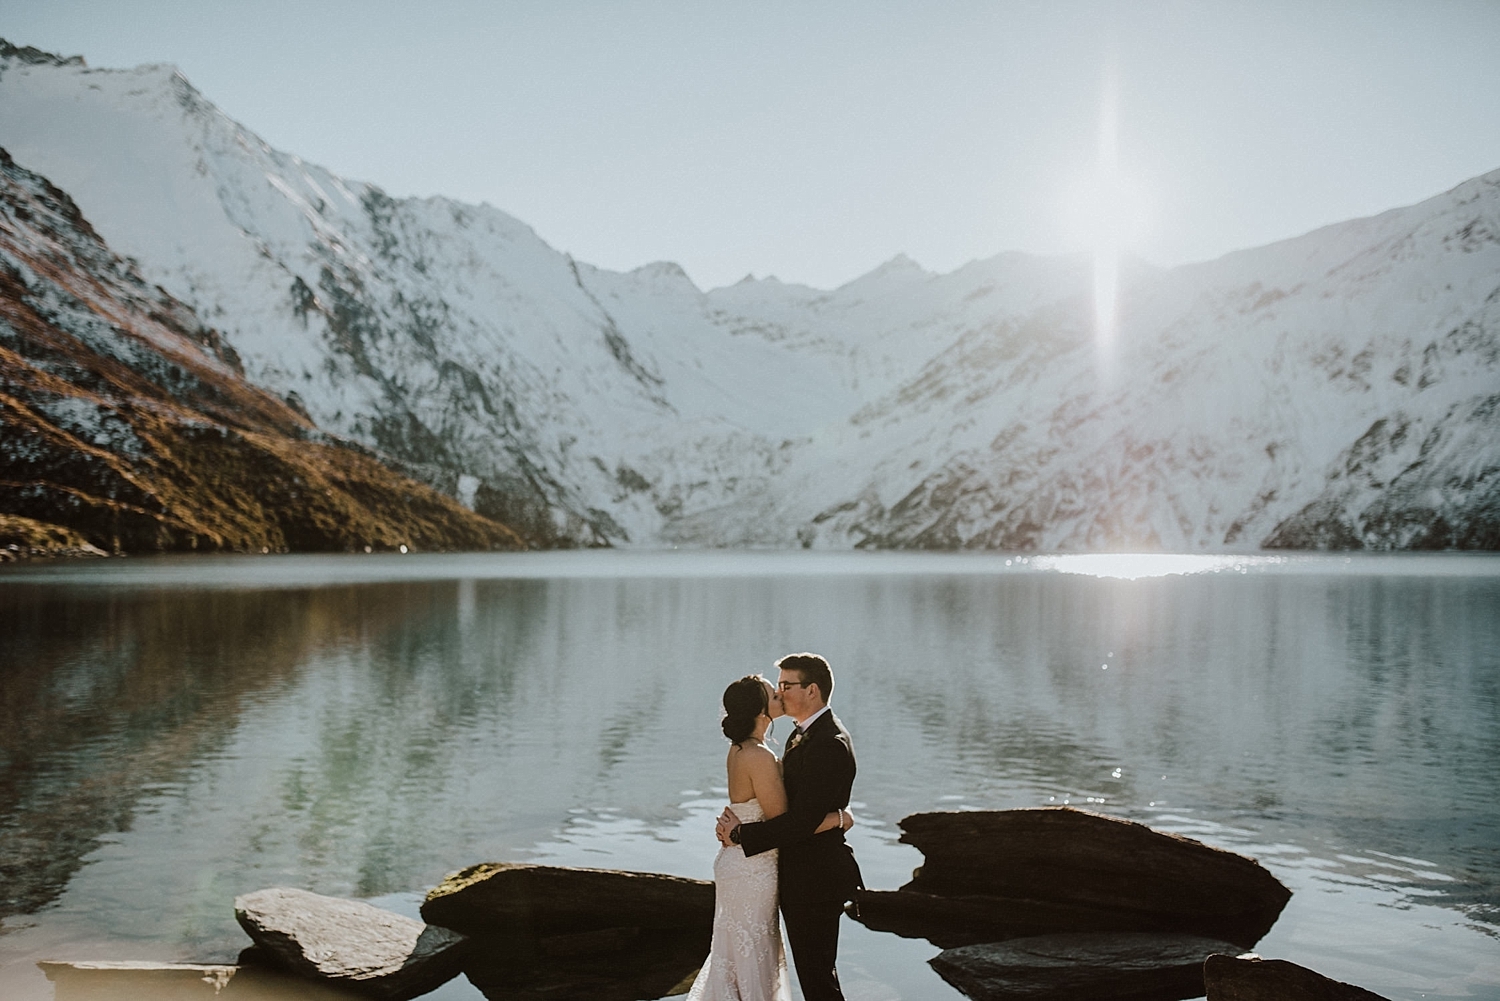 Newly wed couple kiss in front of a snowcapped mount top lake fresh fron their Queenstown elopement.